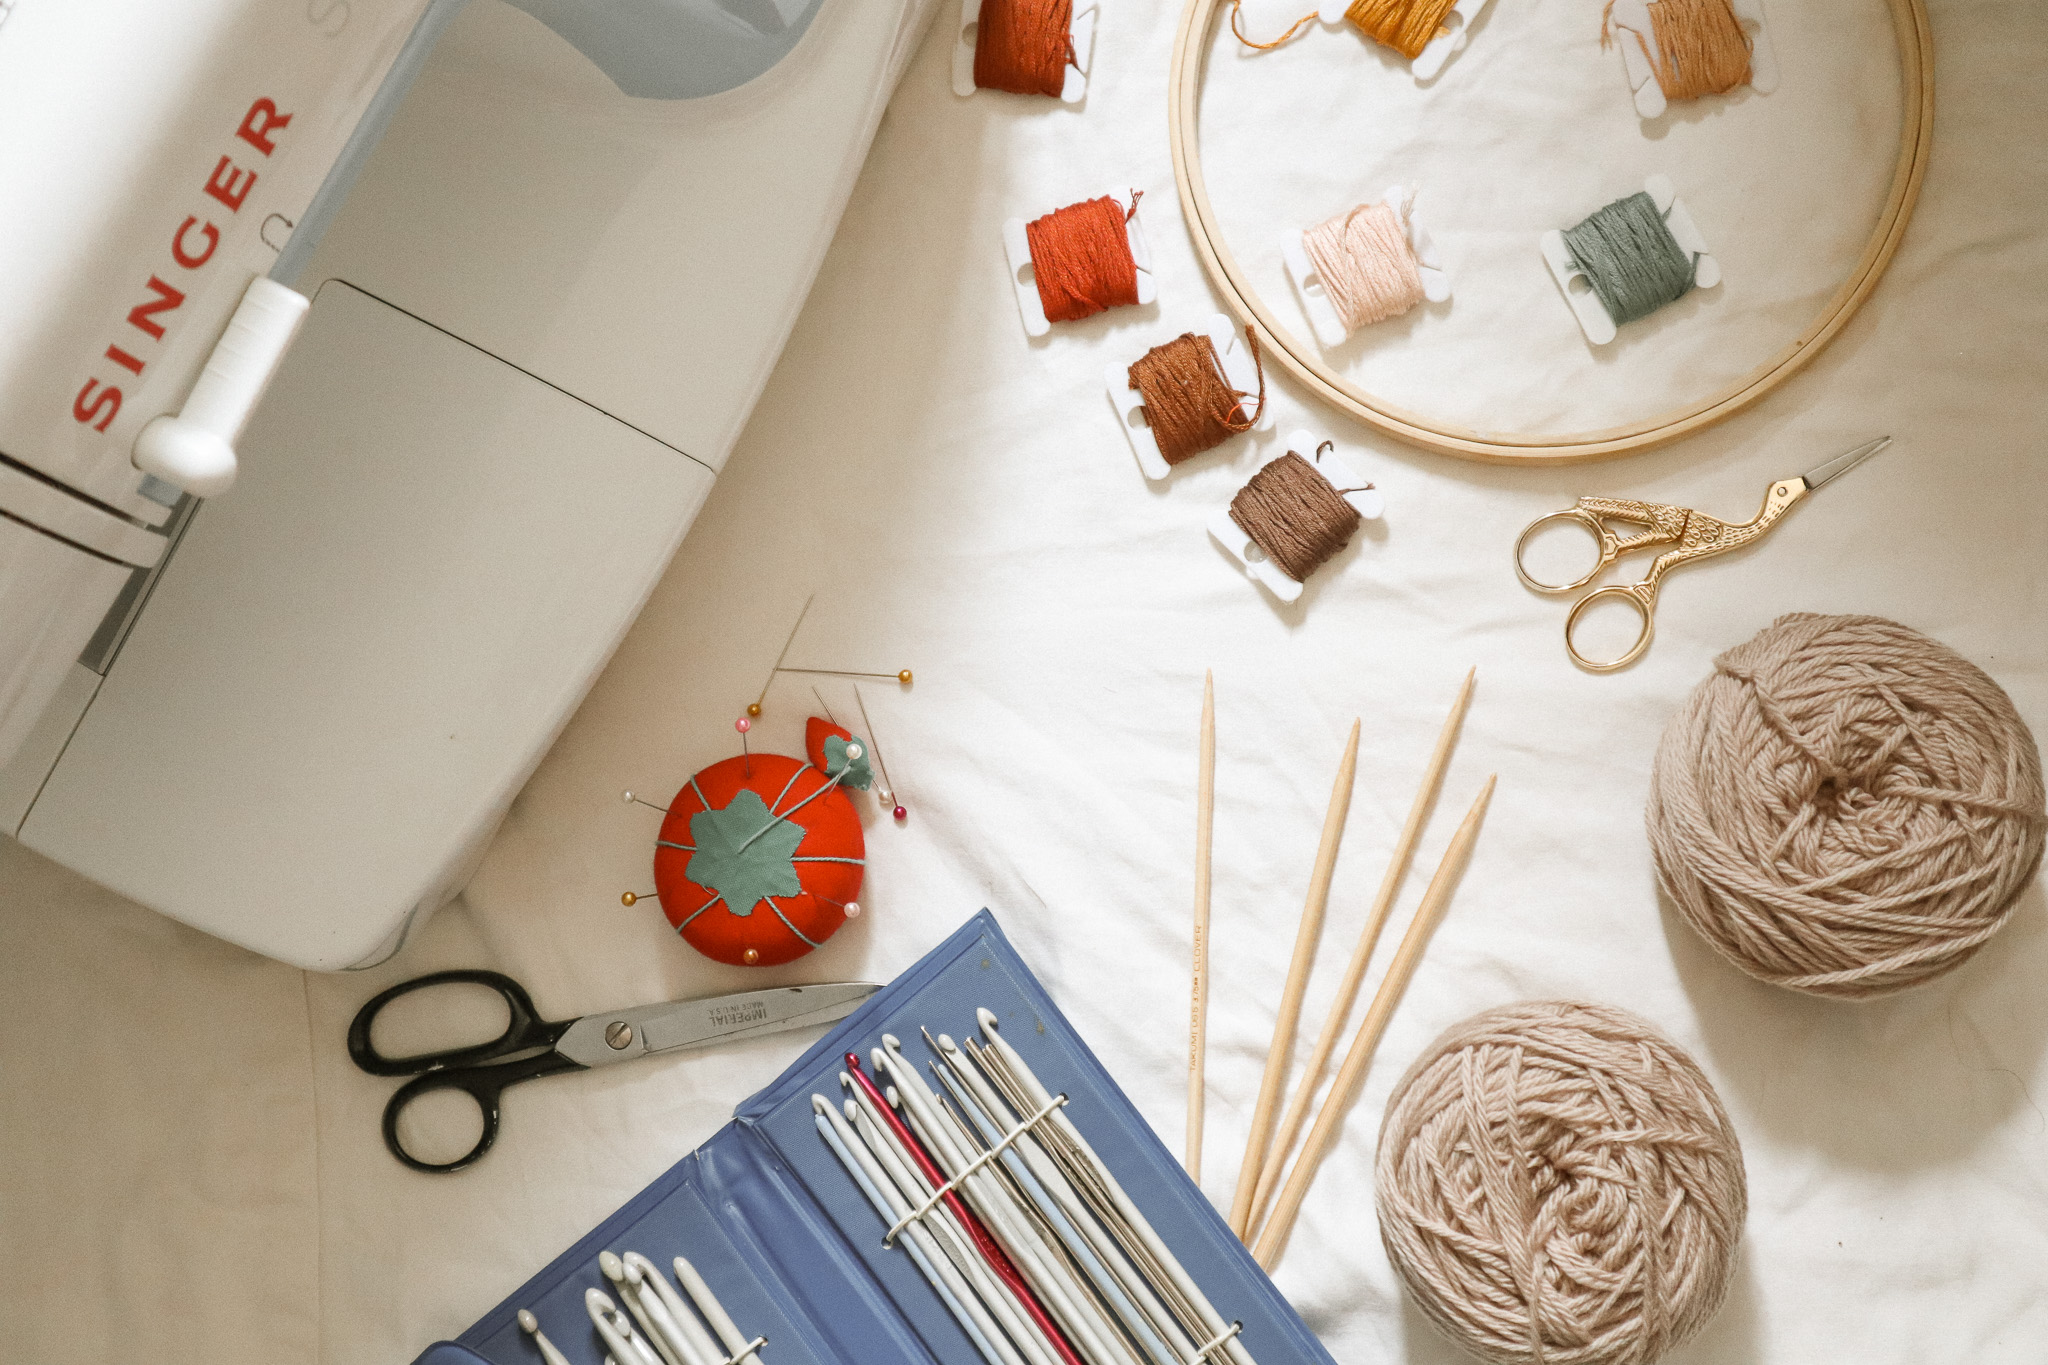 8 Slow Living Hobbies to Help You Slow Down